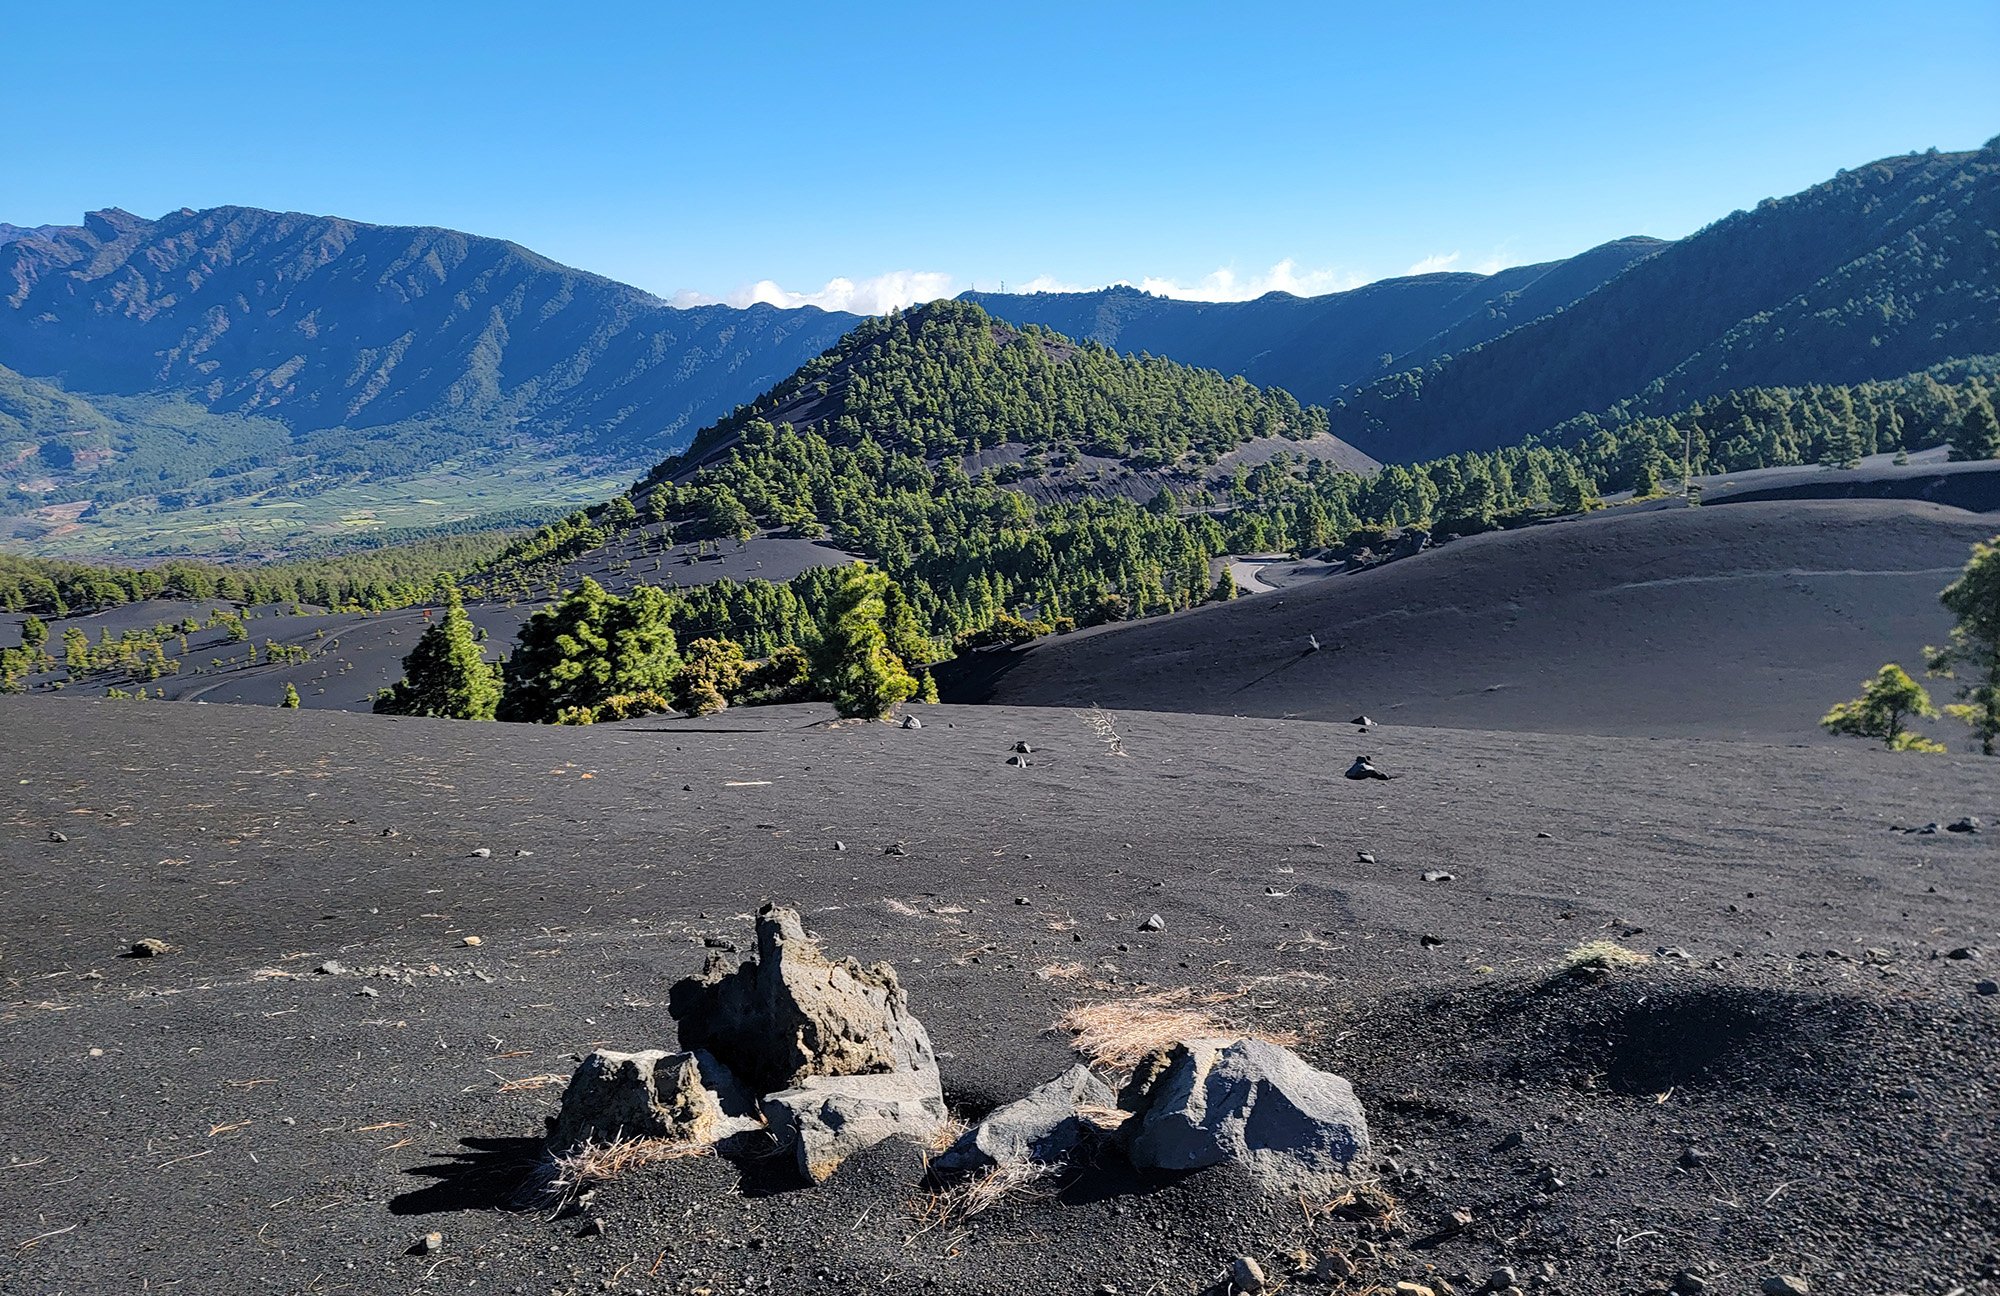 You rapidly exit the forest to keep climbing down along this crater filled with black sands.